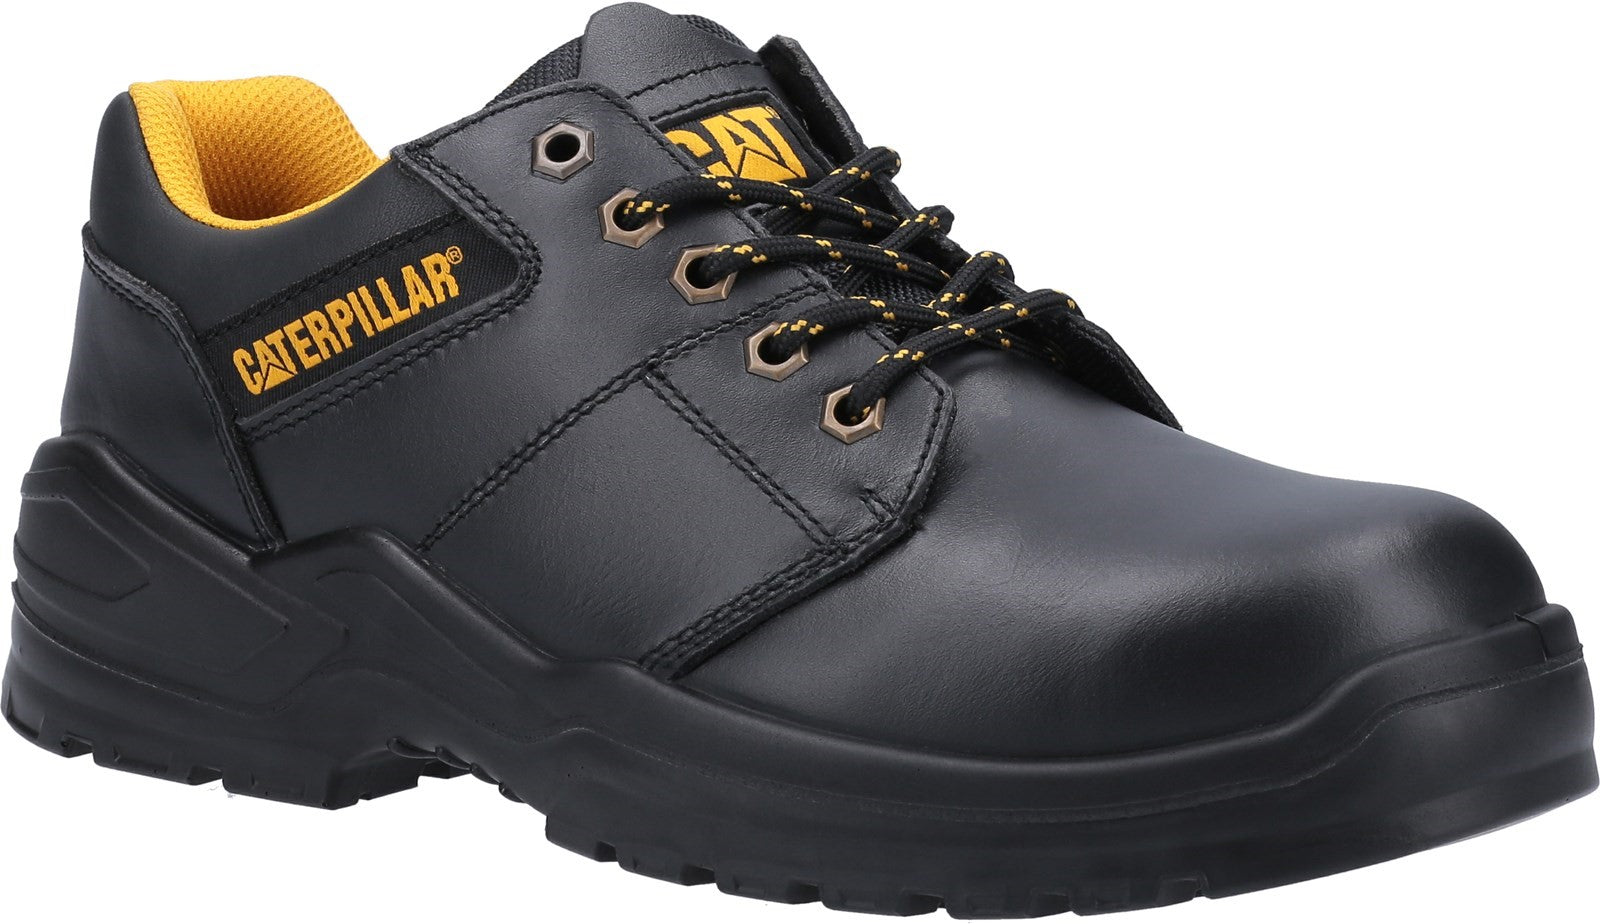 Caterpillar CAT Striver Low S3 black steel toe/midsole work safety shoes